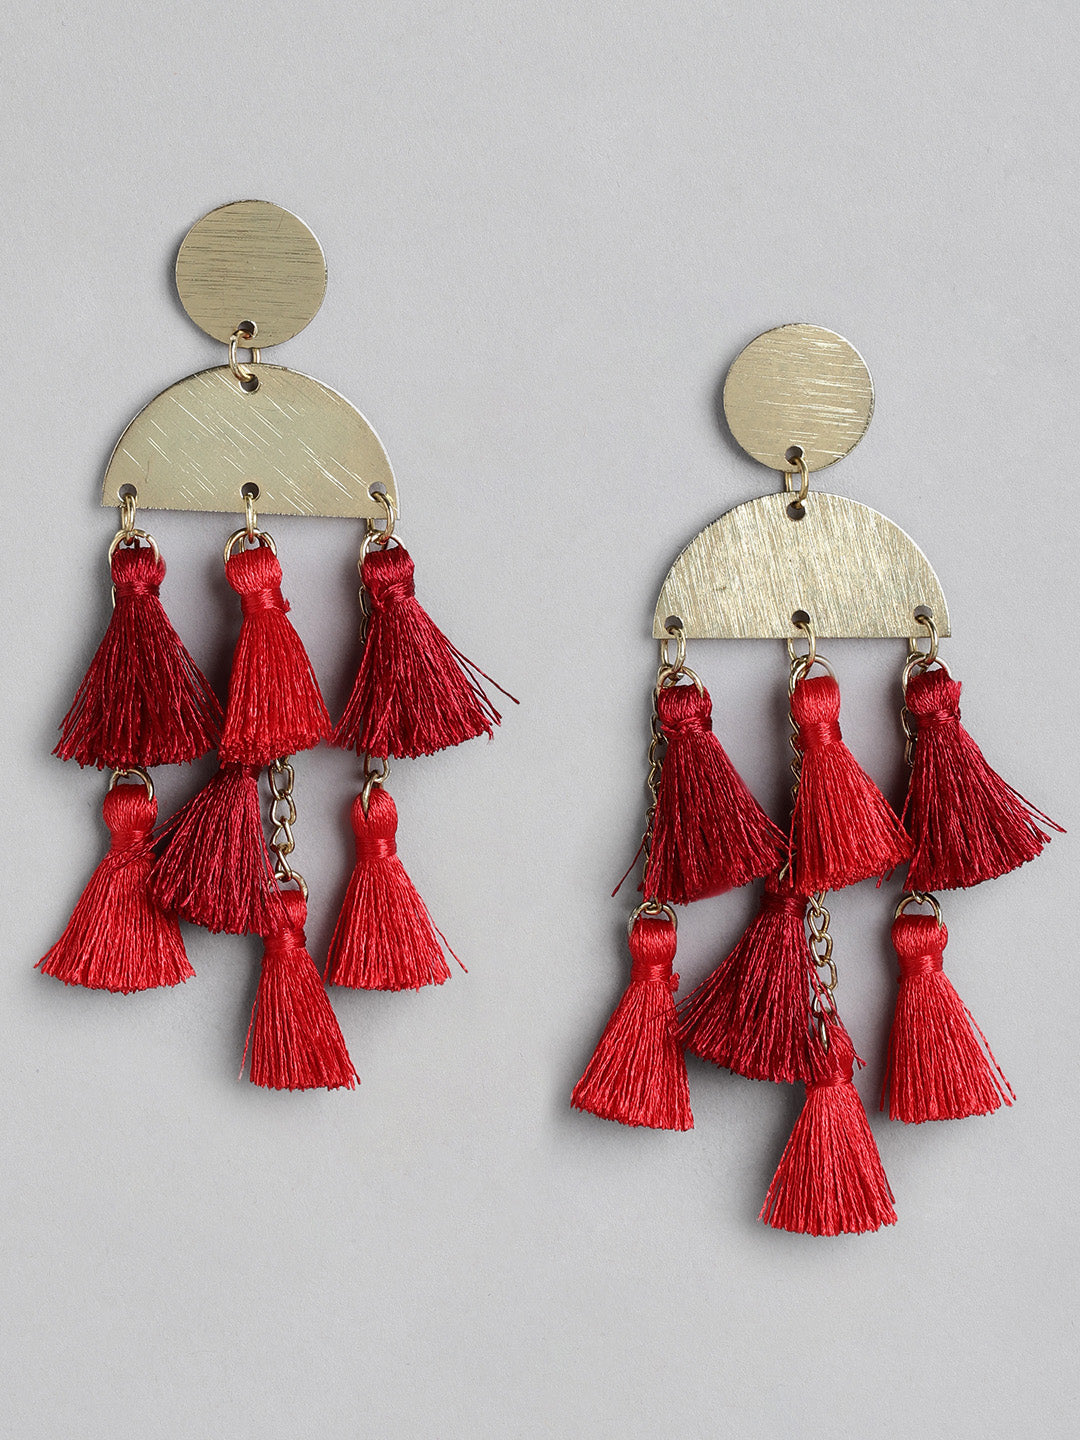 Make a Statement with Red Tassel Beaded Earrings - 3.5 Inches Long